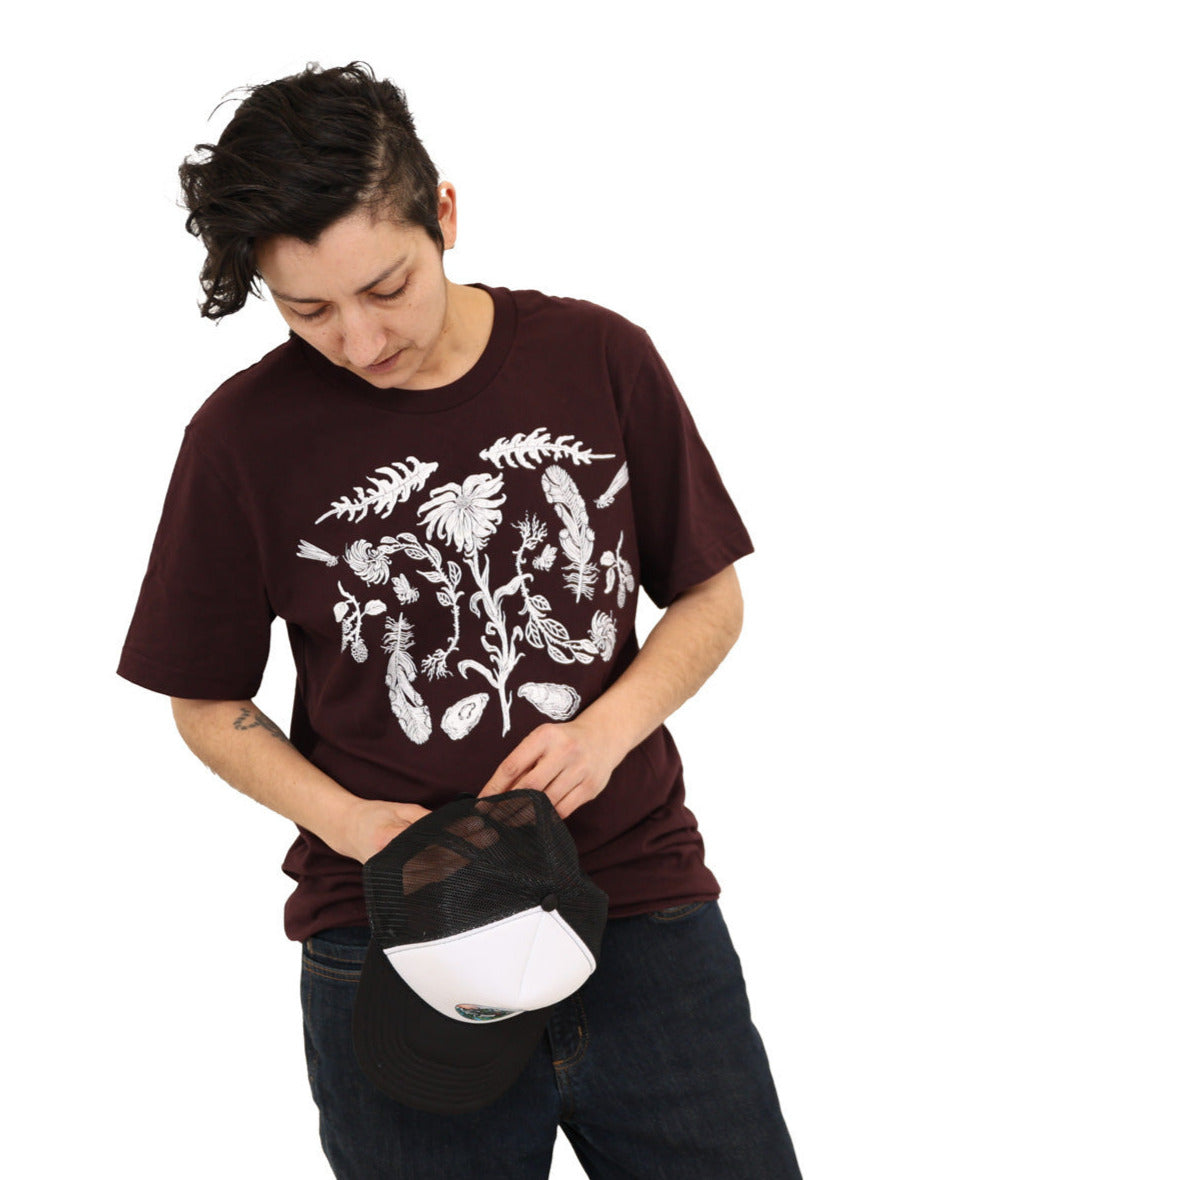 Woman wearing a oxblood colored t-shirt with white ink of flowers, ferns, feathers, shells, etc